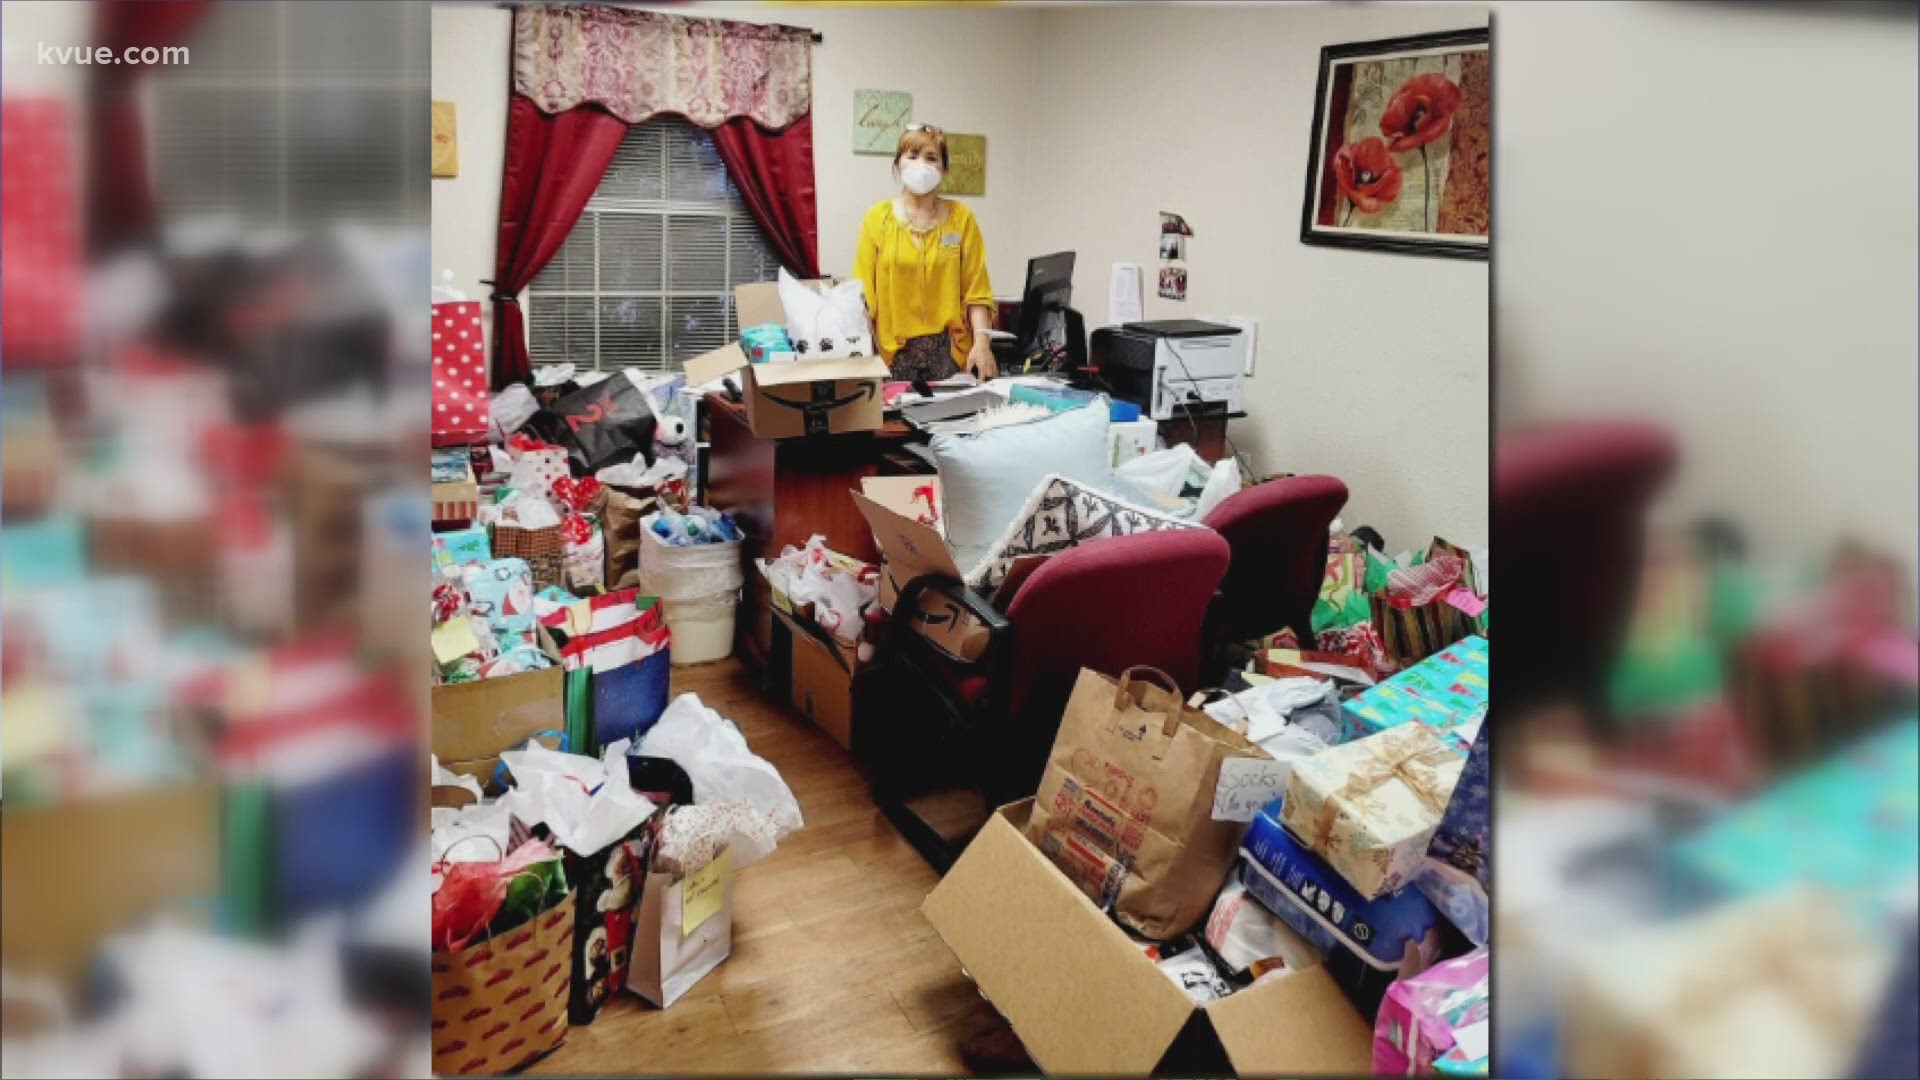 One North Austin woman decided to get into the holiday spirit by giving back. When her neighbors joined in, it was more than she could have imagined.